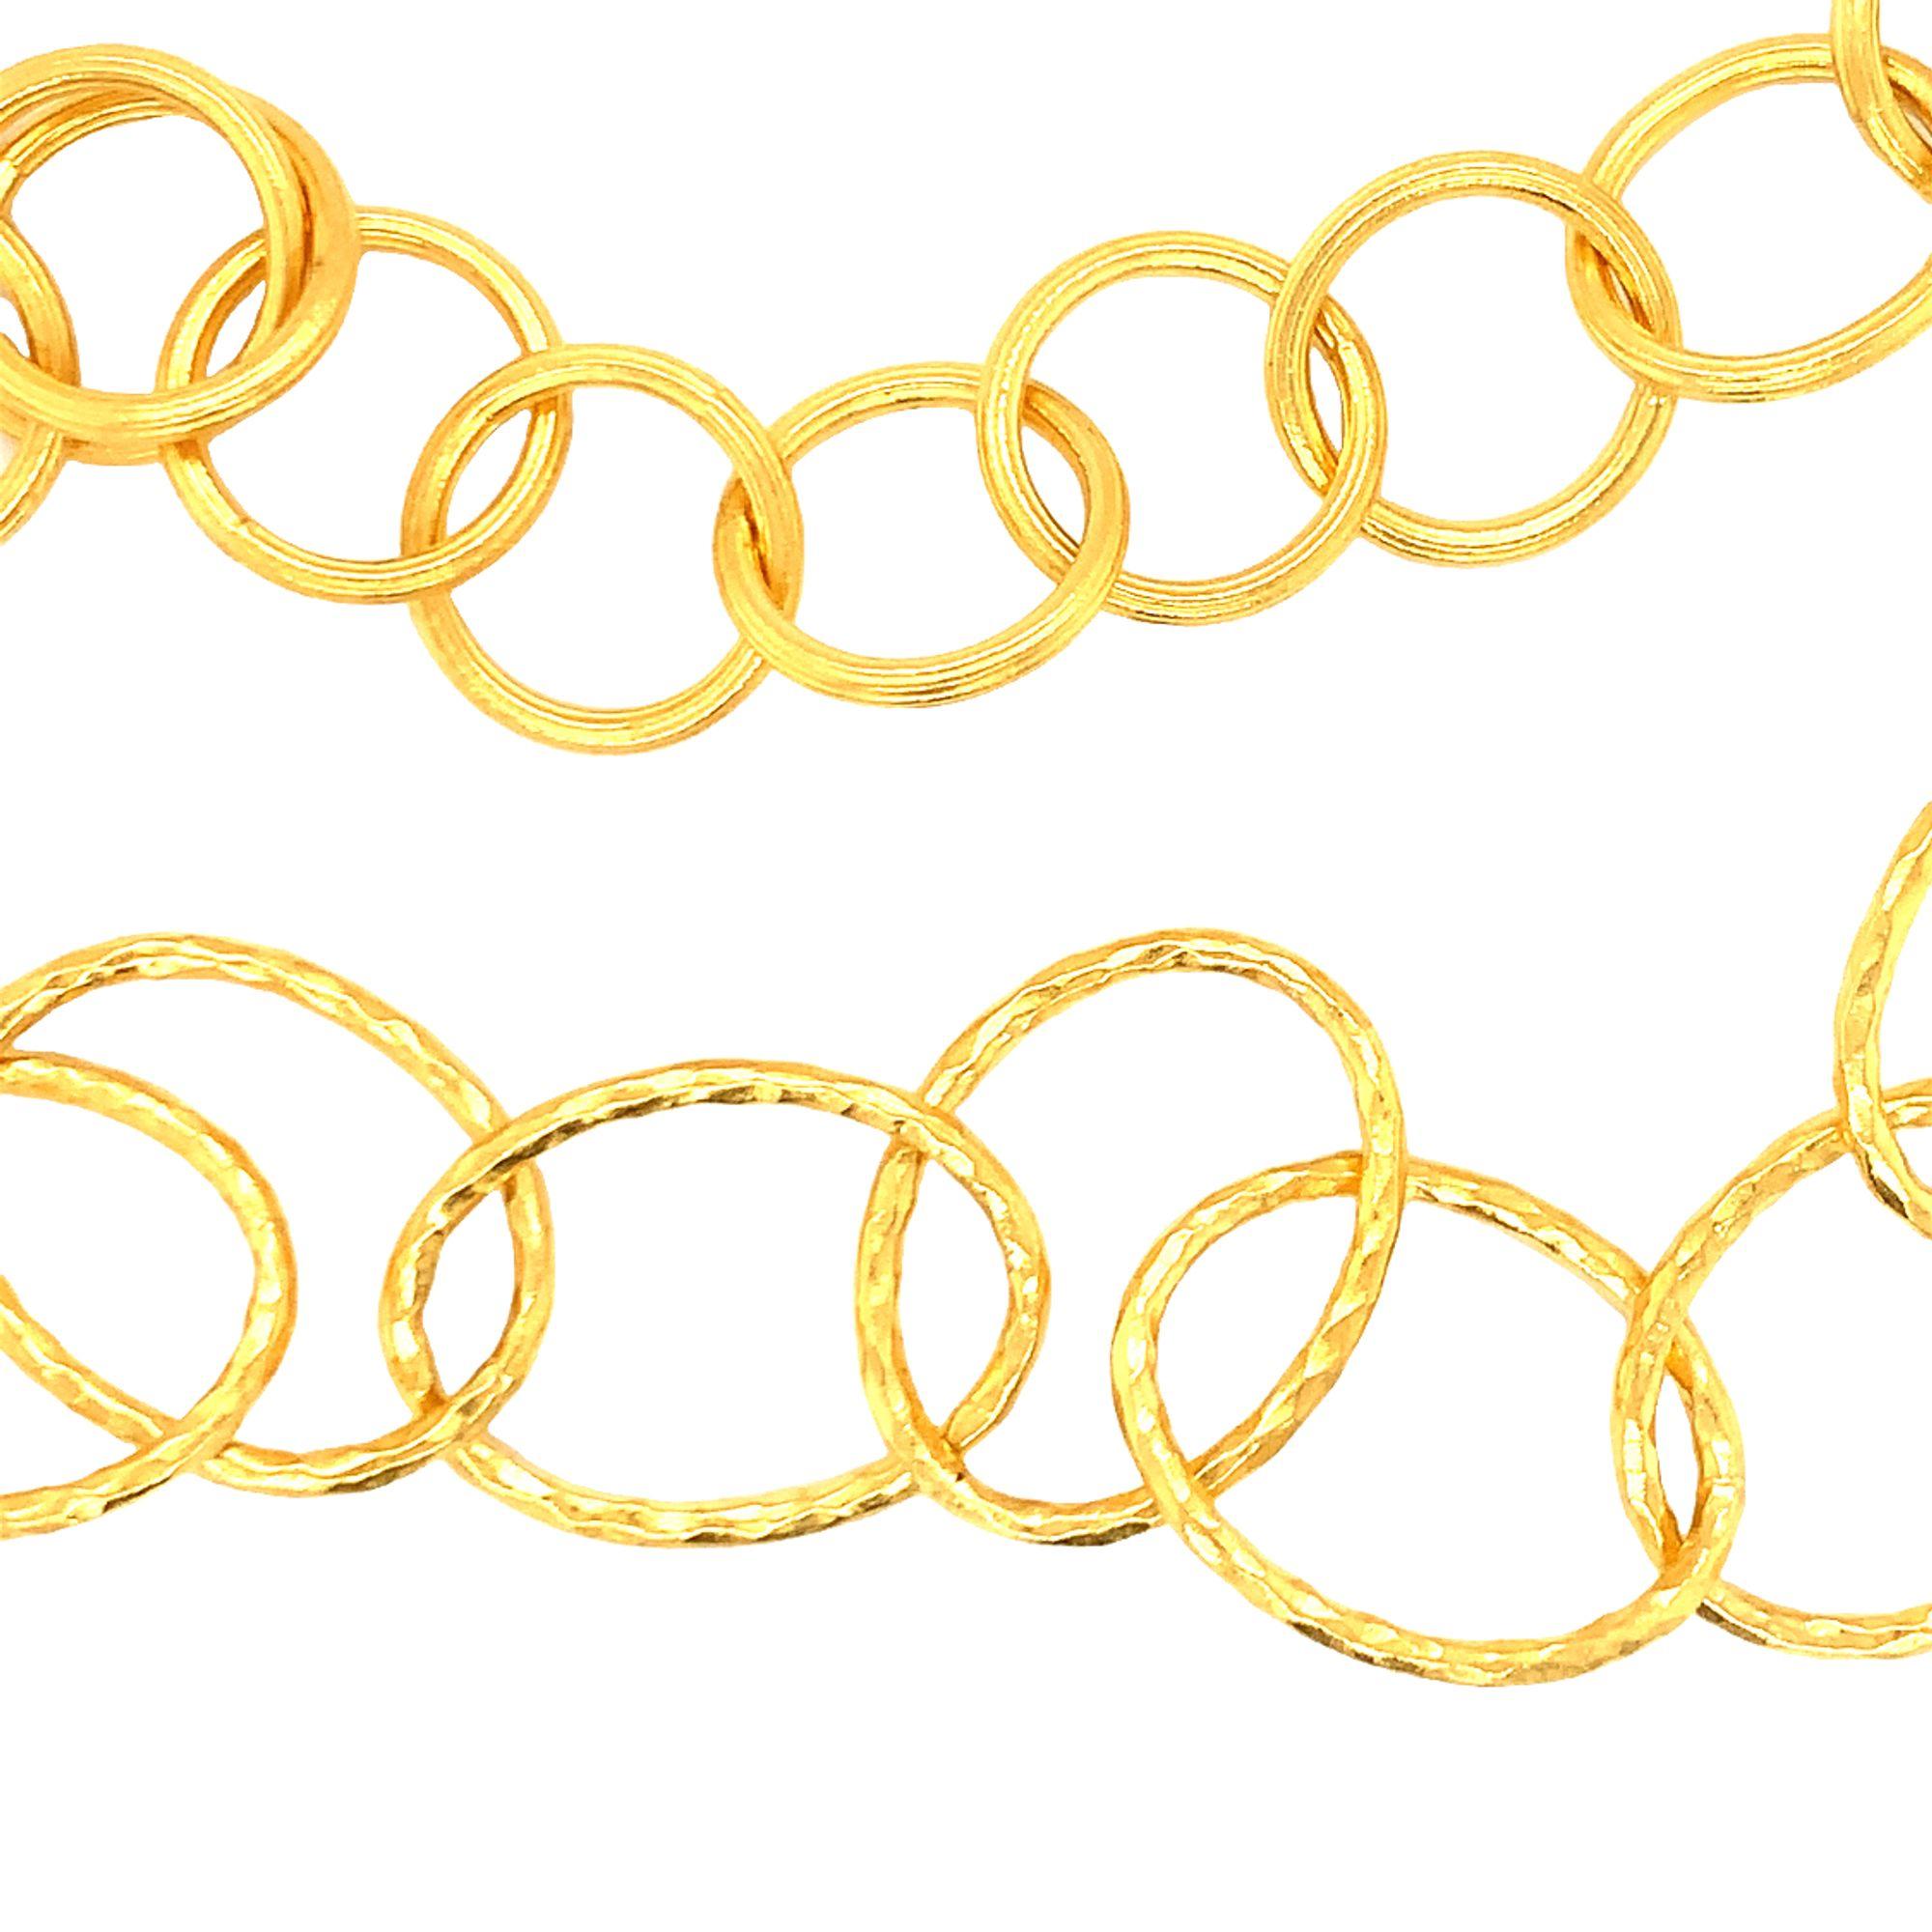 One oval and circular, open-link necklace attributed to Gurhan with textured and hammered gold finish. Circular links measure 15 millimeters in diameter, small oval links measure 24 x 19 millimeters and large oval links measure 51 x 24 millimeters.